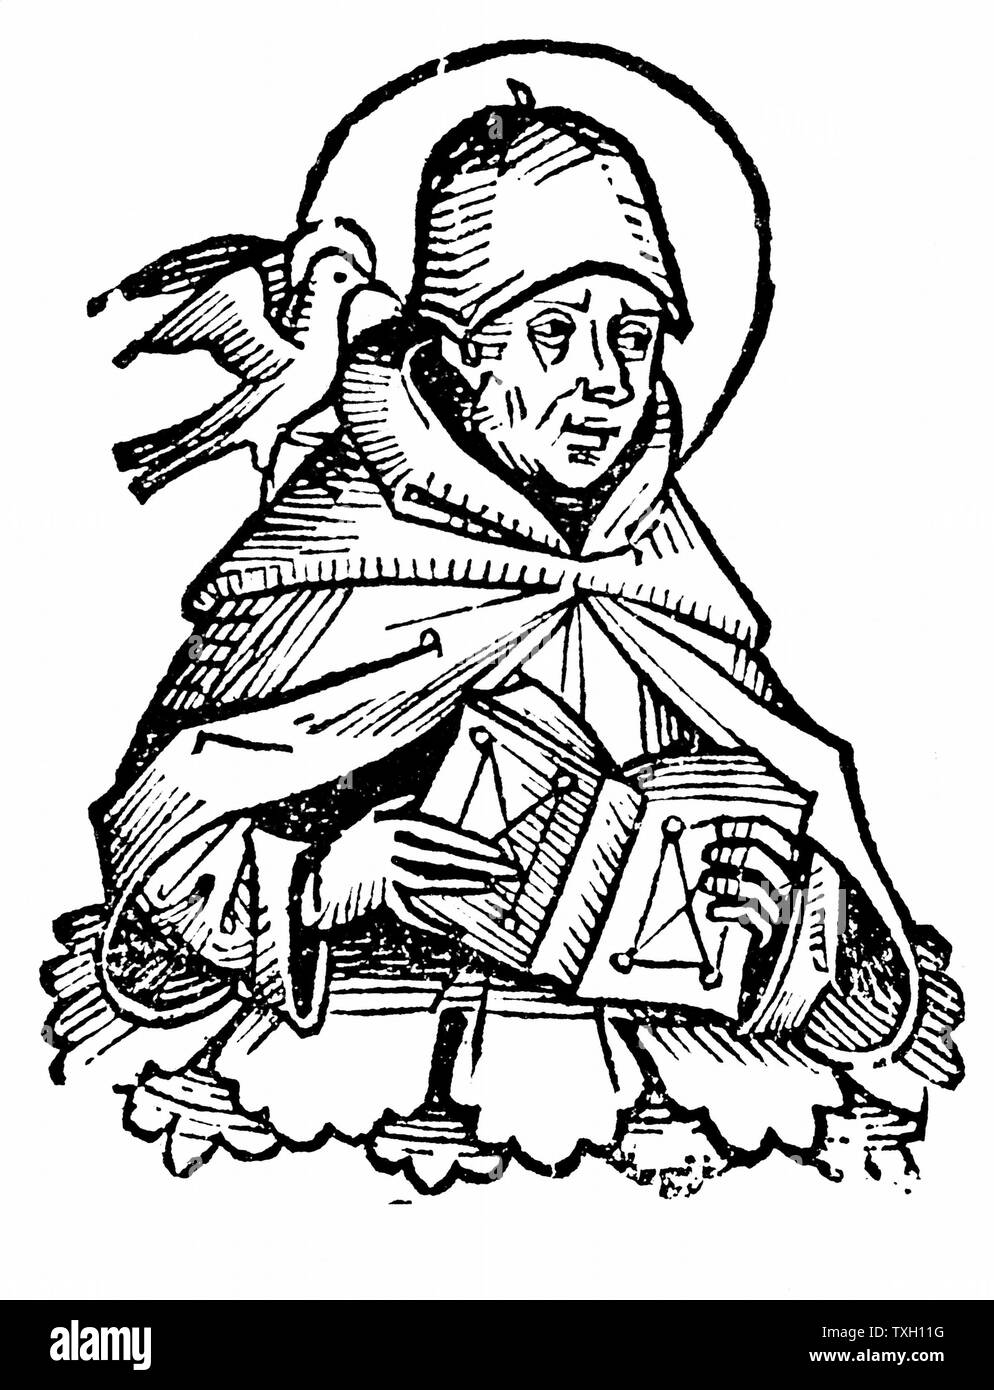 St Thomas Aquinas (c1225-1274) Italian philosopher and theologian. Joined Dominican order and studied under Albertus Magnus at Cologne. Wrote commentaries on Aristotle He holds open a book, while on his shoulder is the dove of the Holy Spirit. Woodcut from Hartmann Schedel 'Liber chronicarum mundi' (Nuremberg Chronicle) Nuremberg 1493 Stock Photo